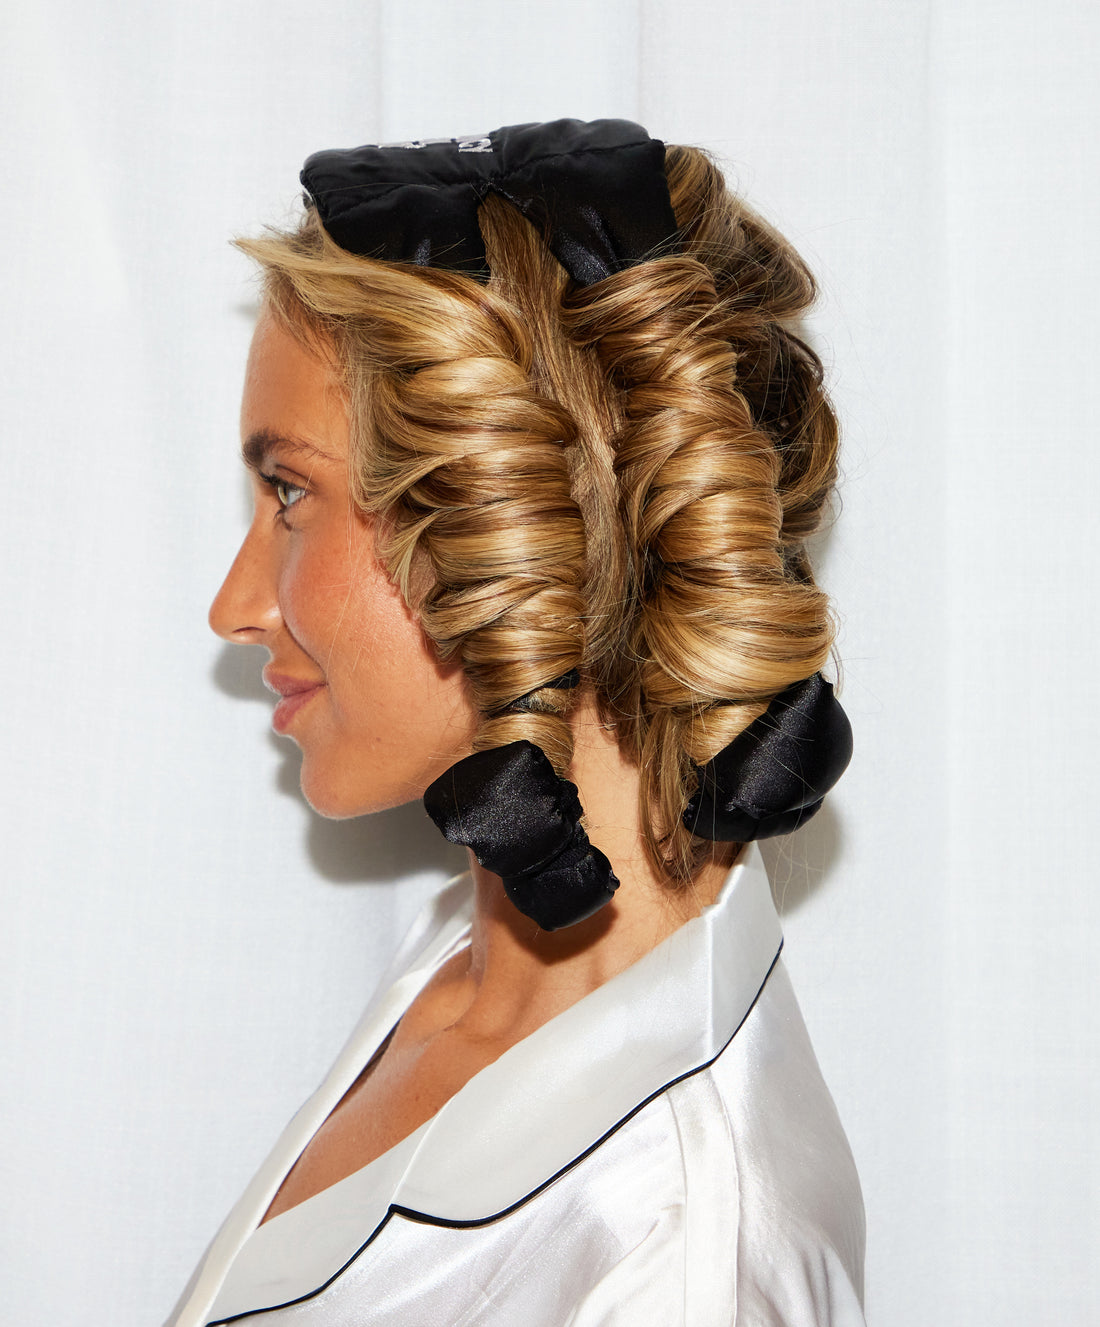 Bouncy Blow Band® Heatless Curling Band - Black Satin